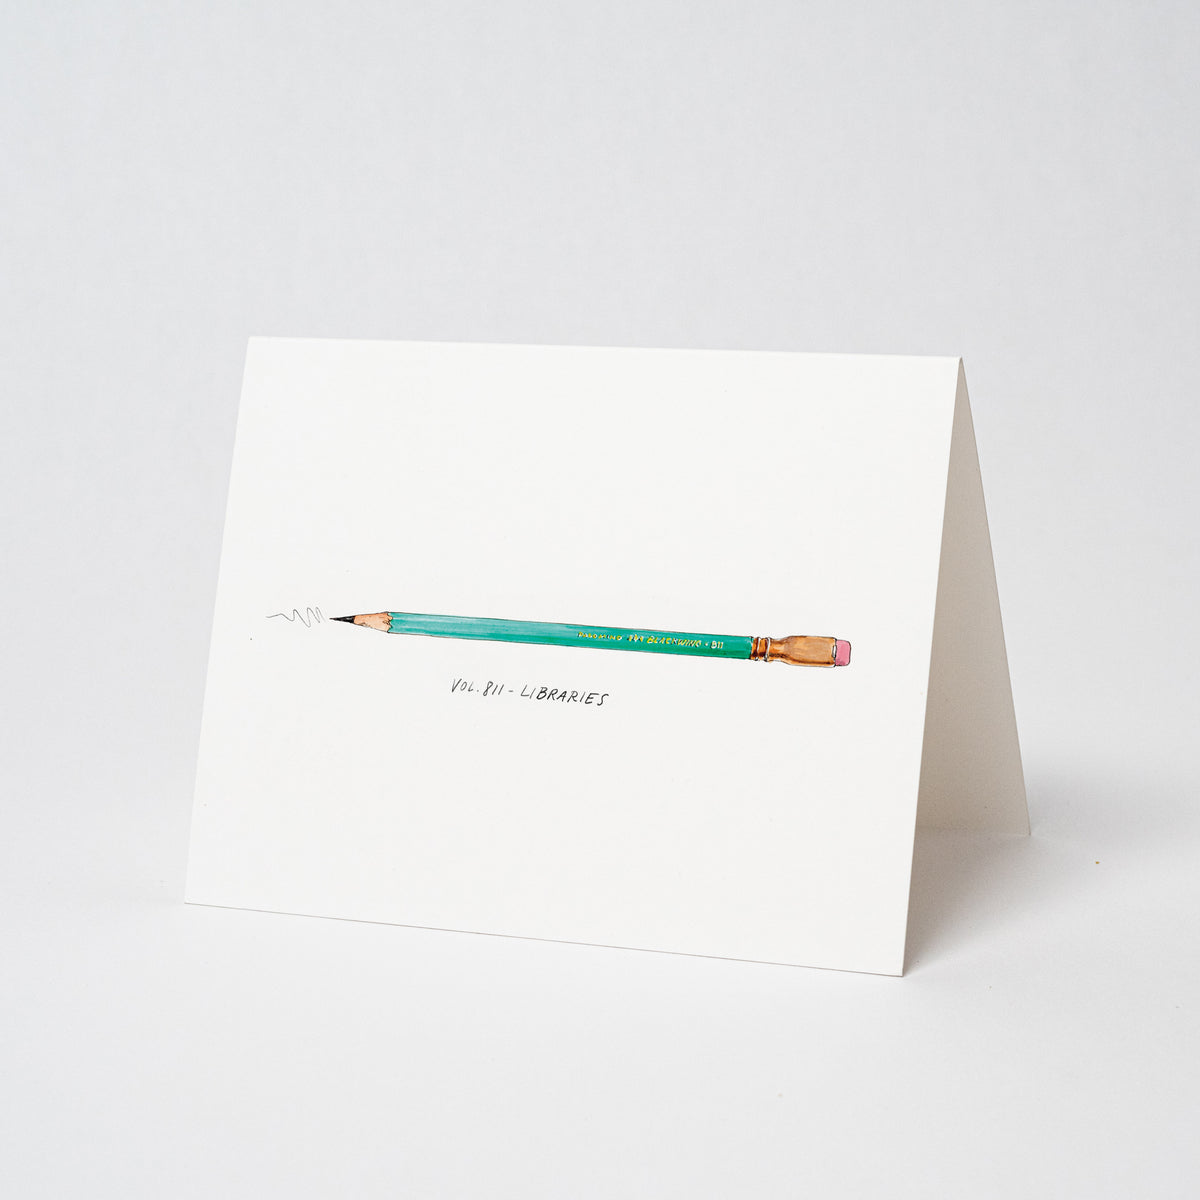 A limited edition Blackwing Volumes Notecards - Year 4 featuring a pencil drawing by Samantha Dion Baker.